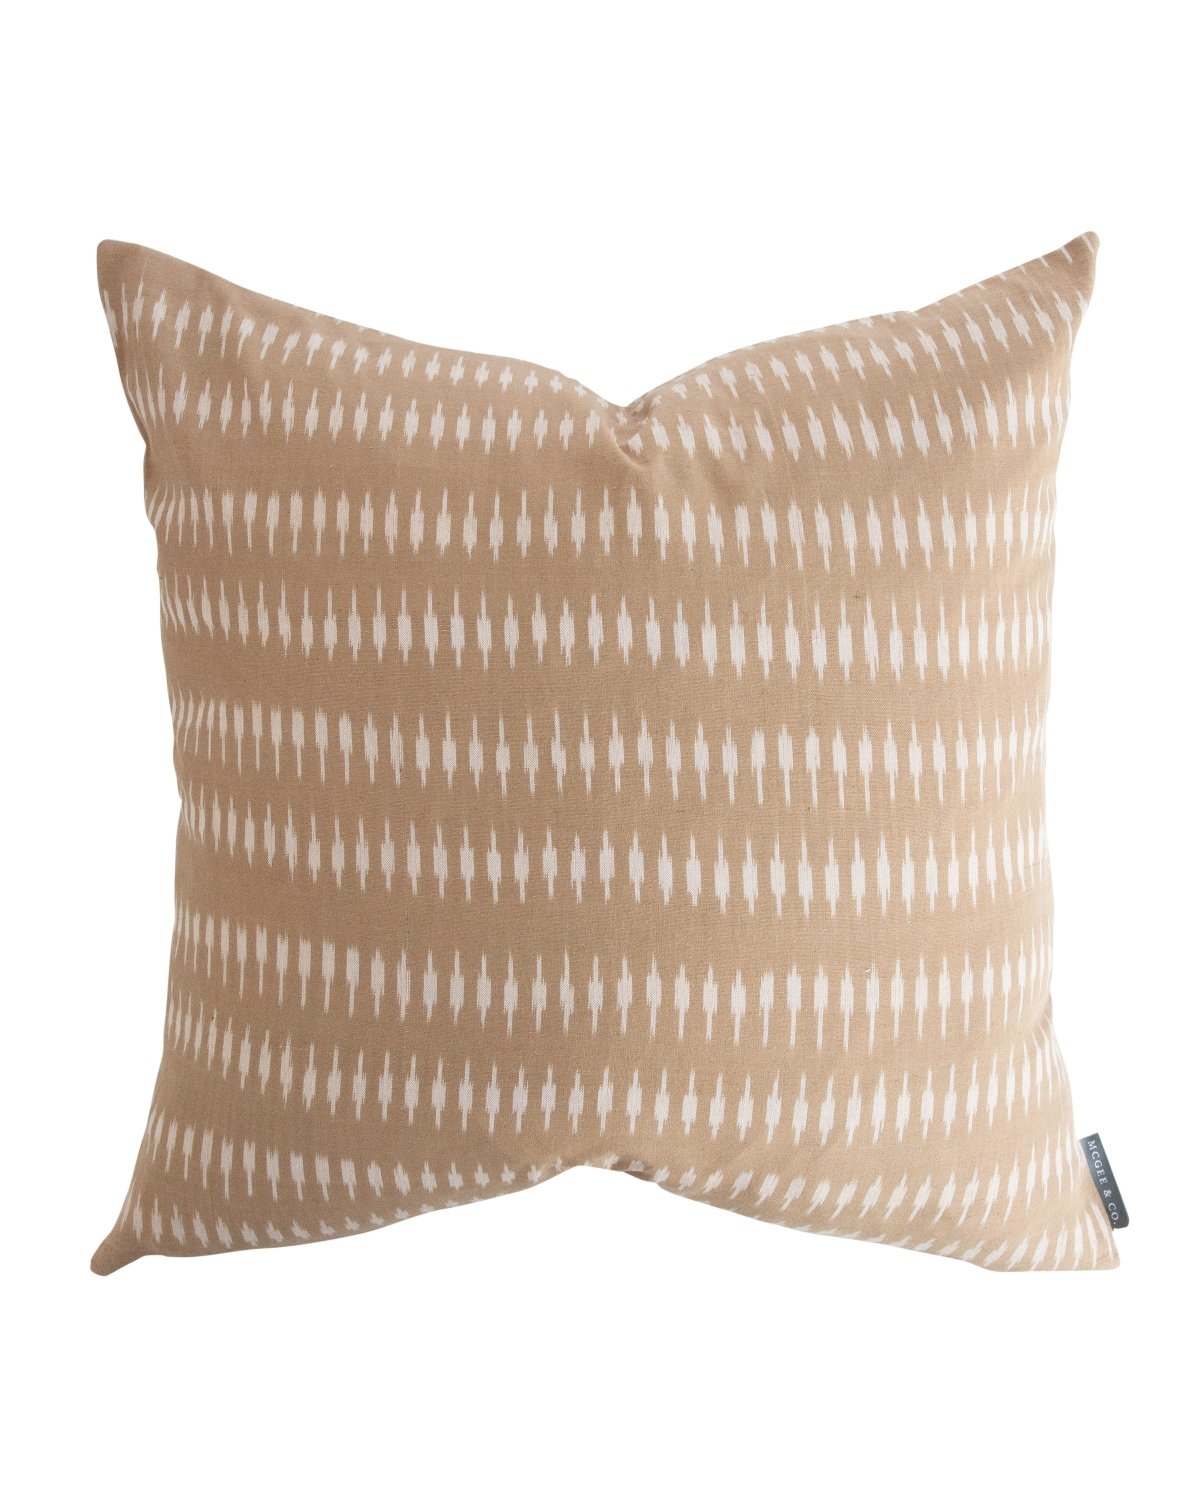 LYLE PILLOW WITHOUT INSERT, 20" x 20" - Image 3